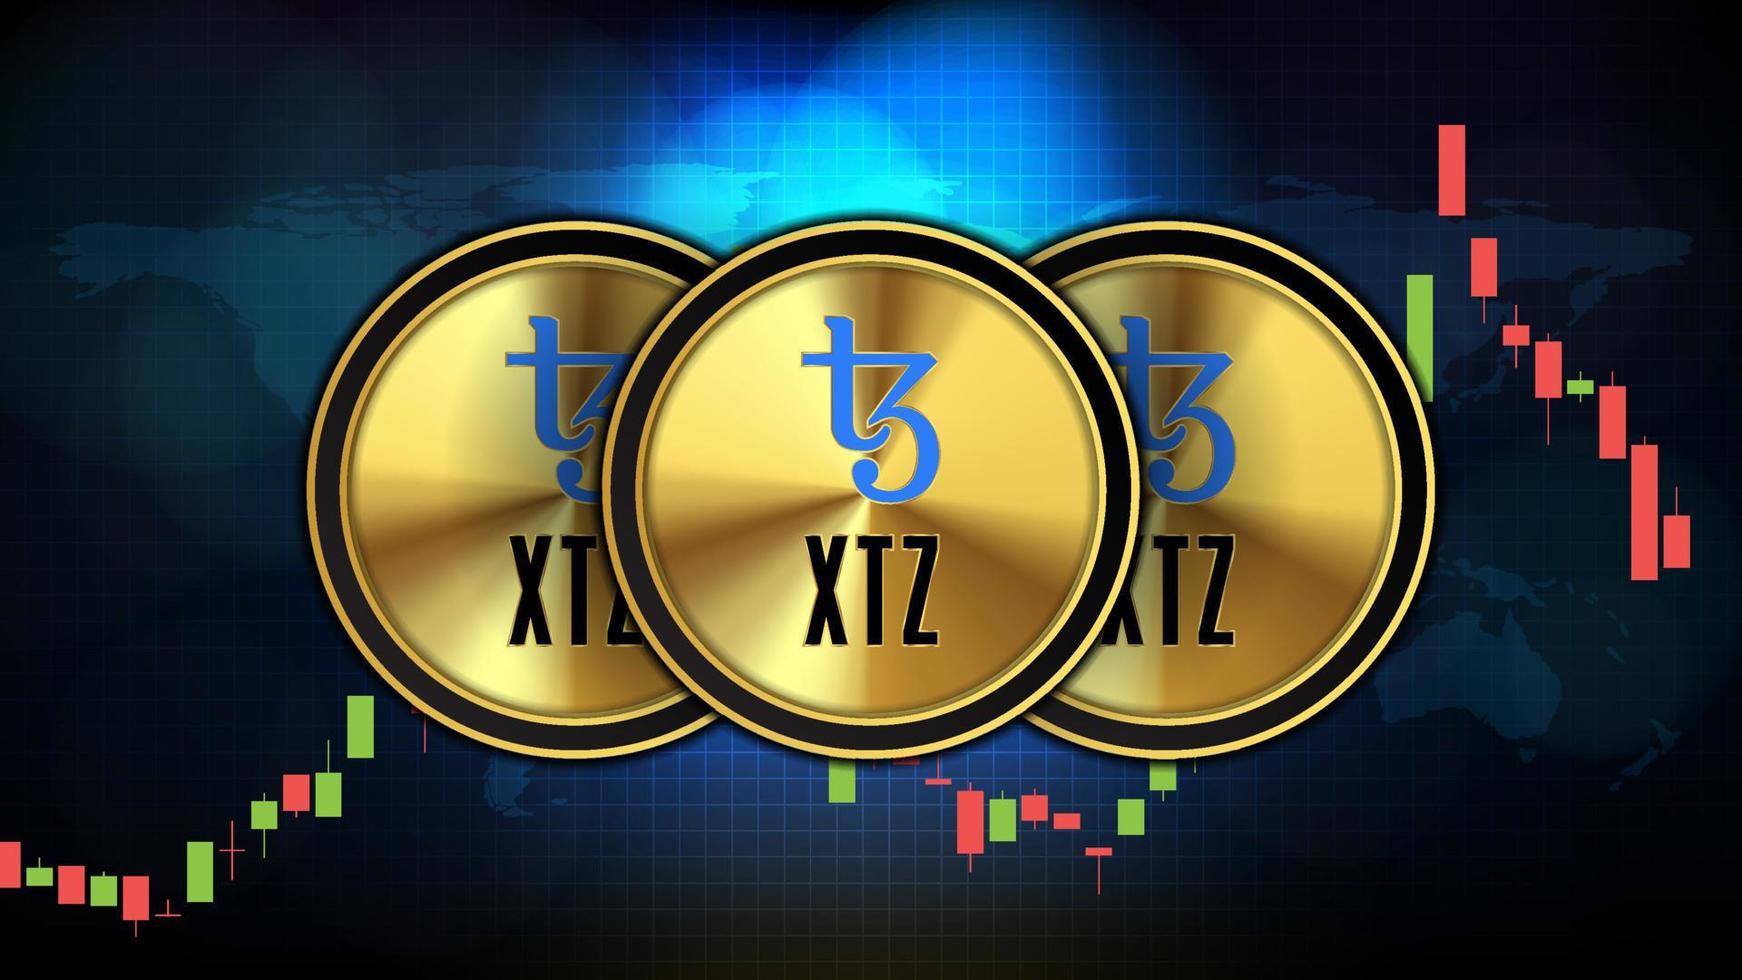 abstract futuristic technology background of Tezos XTZ Price graph Chart coin digital cryptocurrency vector